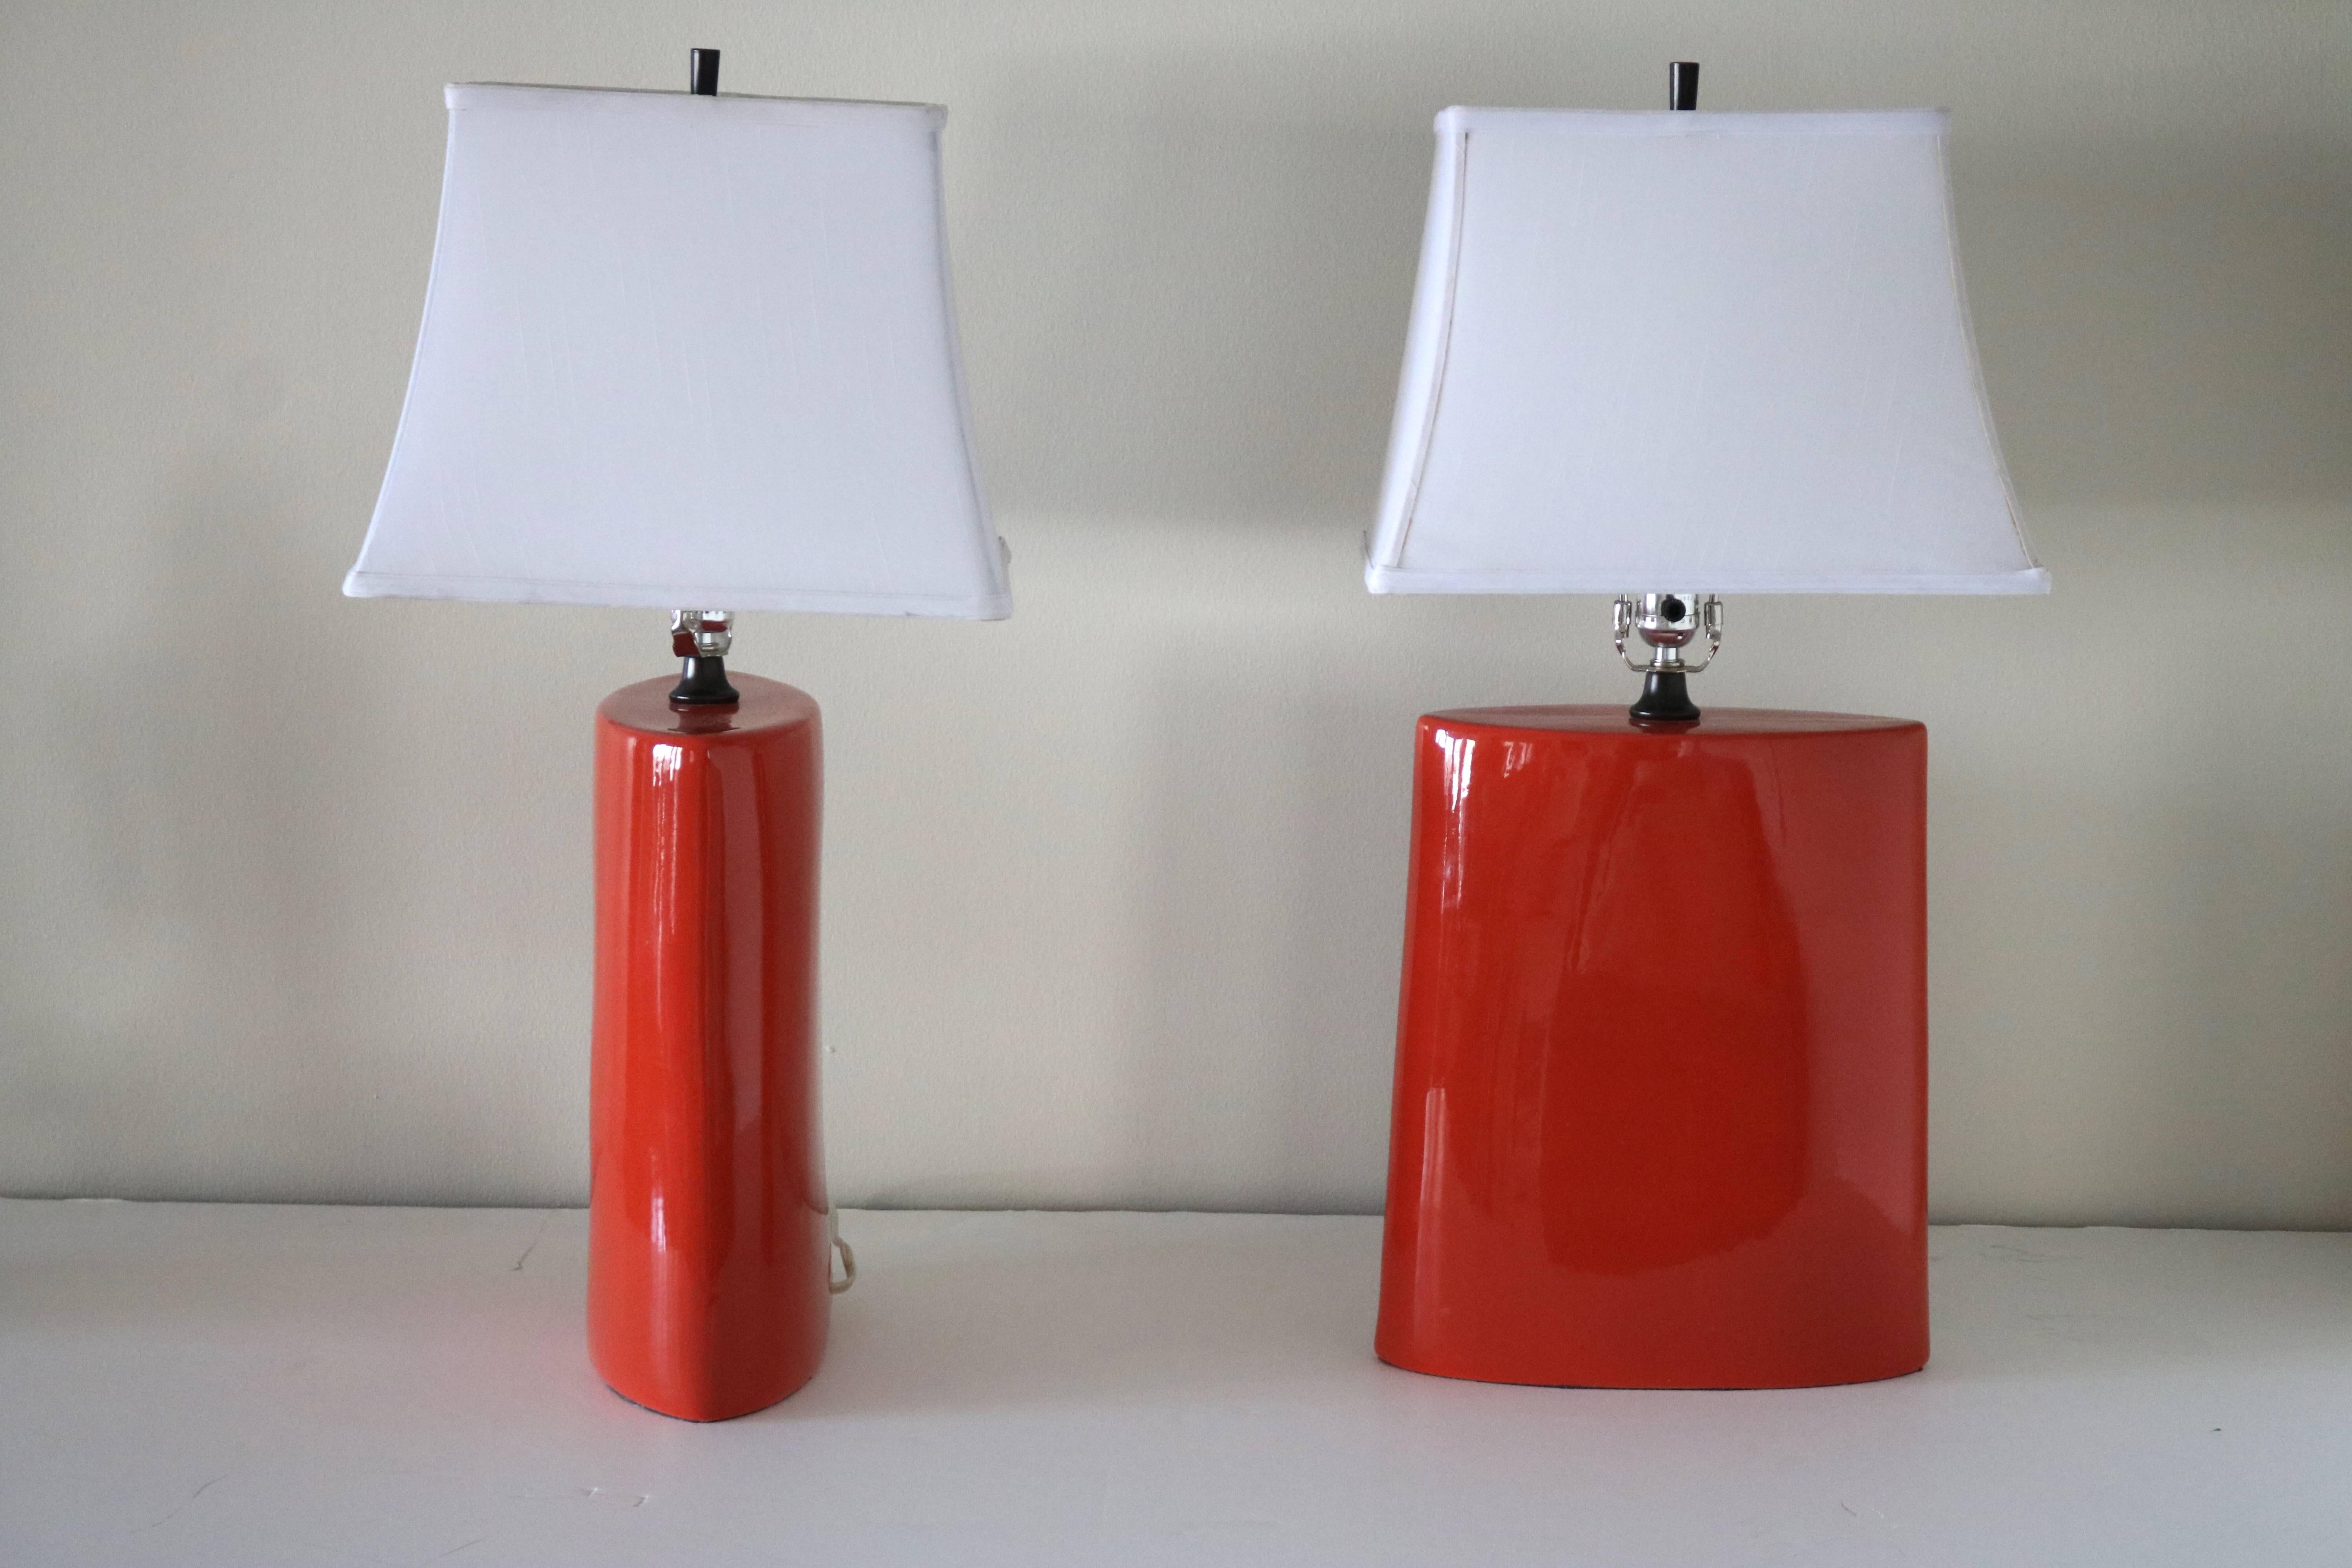 1980s stunning modern table lamps handcrafted ceramic base in a brilliant vermillion Red with a curved shaped white shade-chrome harp and finial
A punch of color for aded style!

Measures: 28 1/2